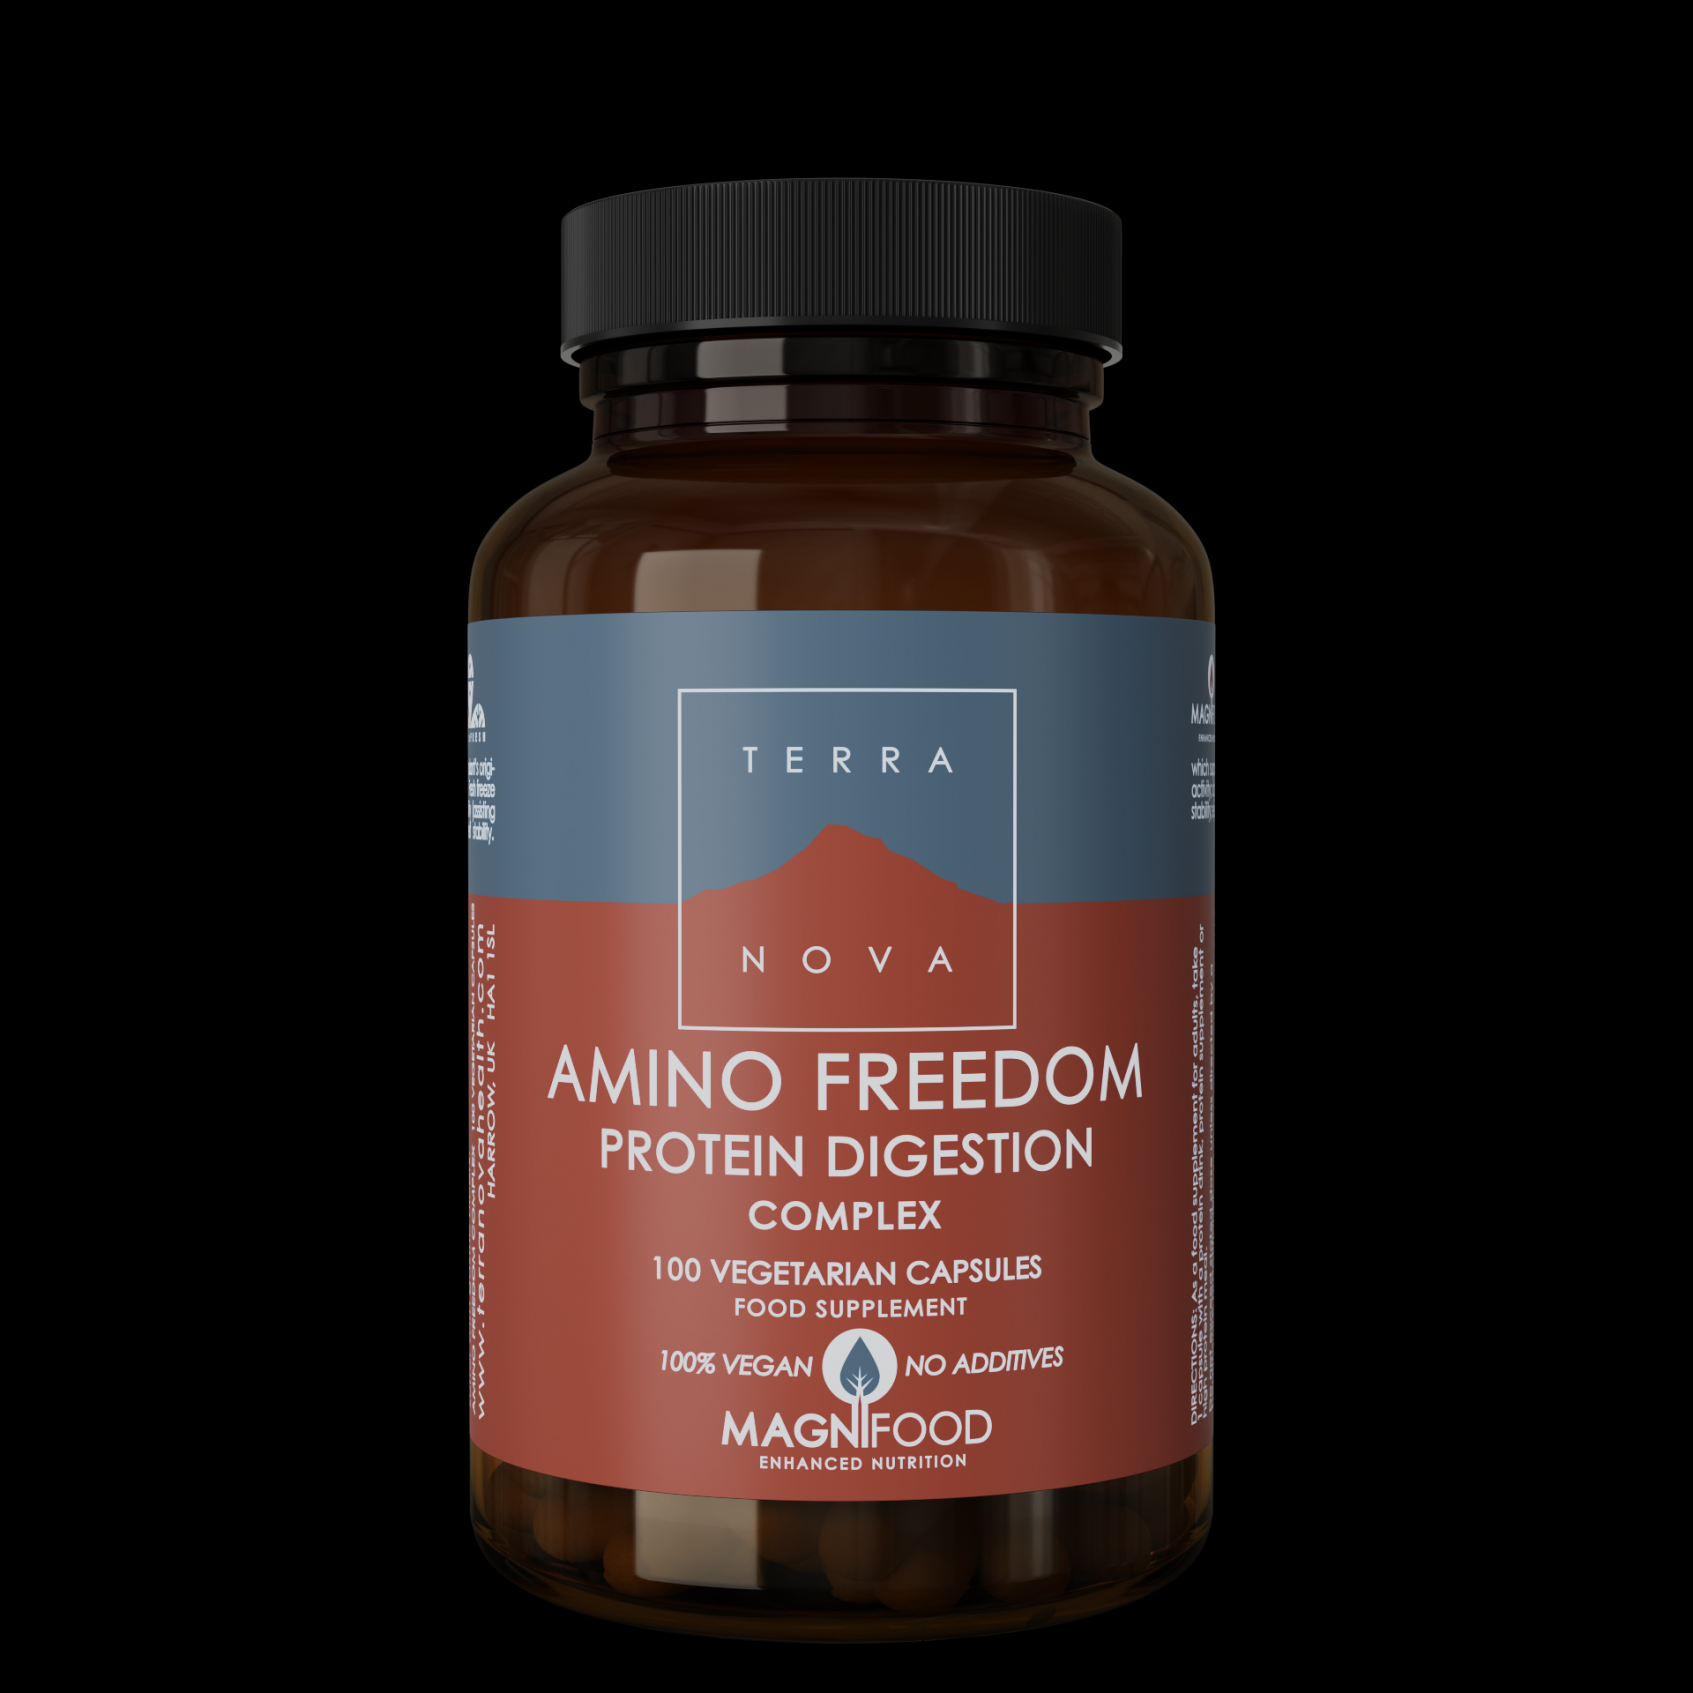 Amino Freedom Protein Digestion Complex 100's